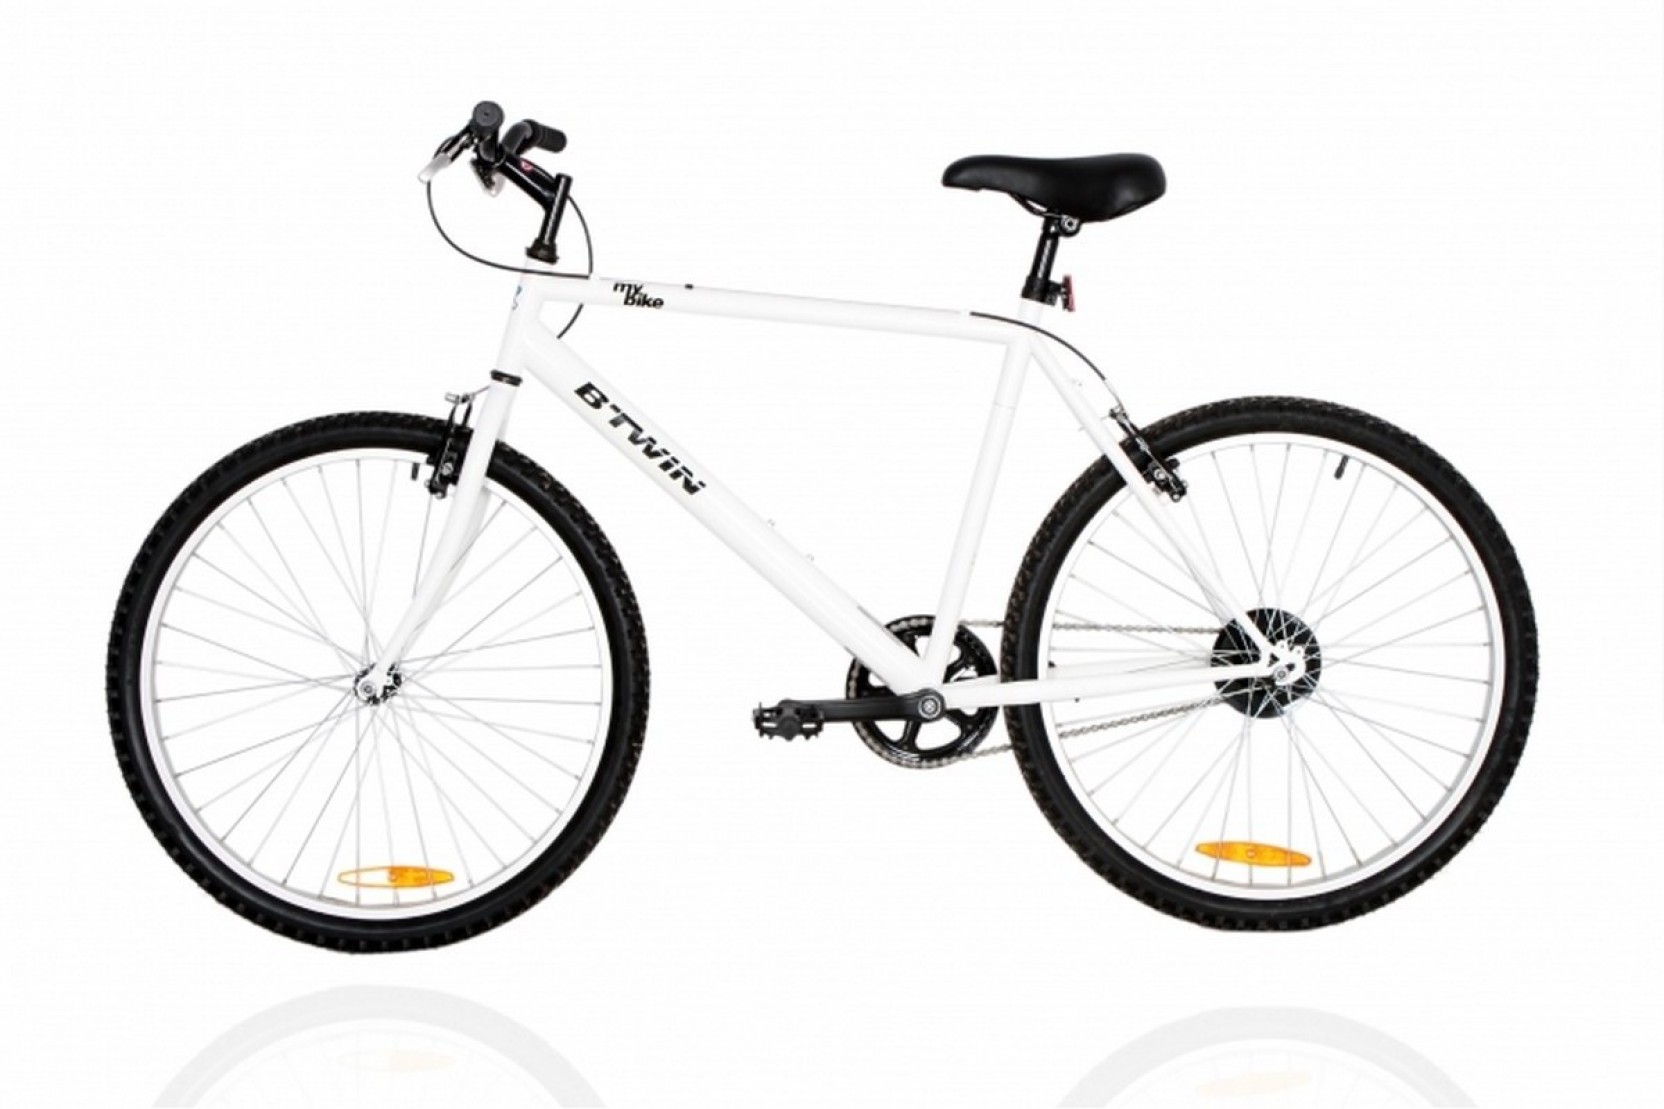 Btwin Mybike Cycle Price and Review 